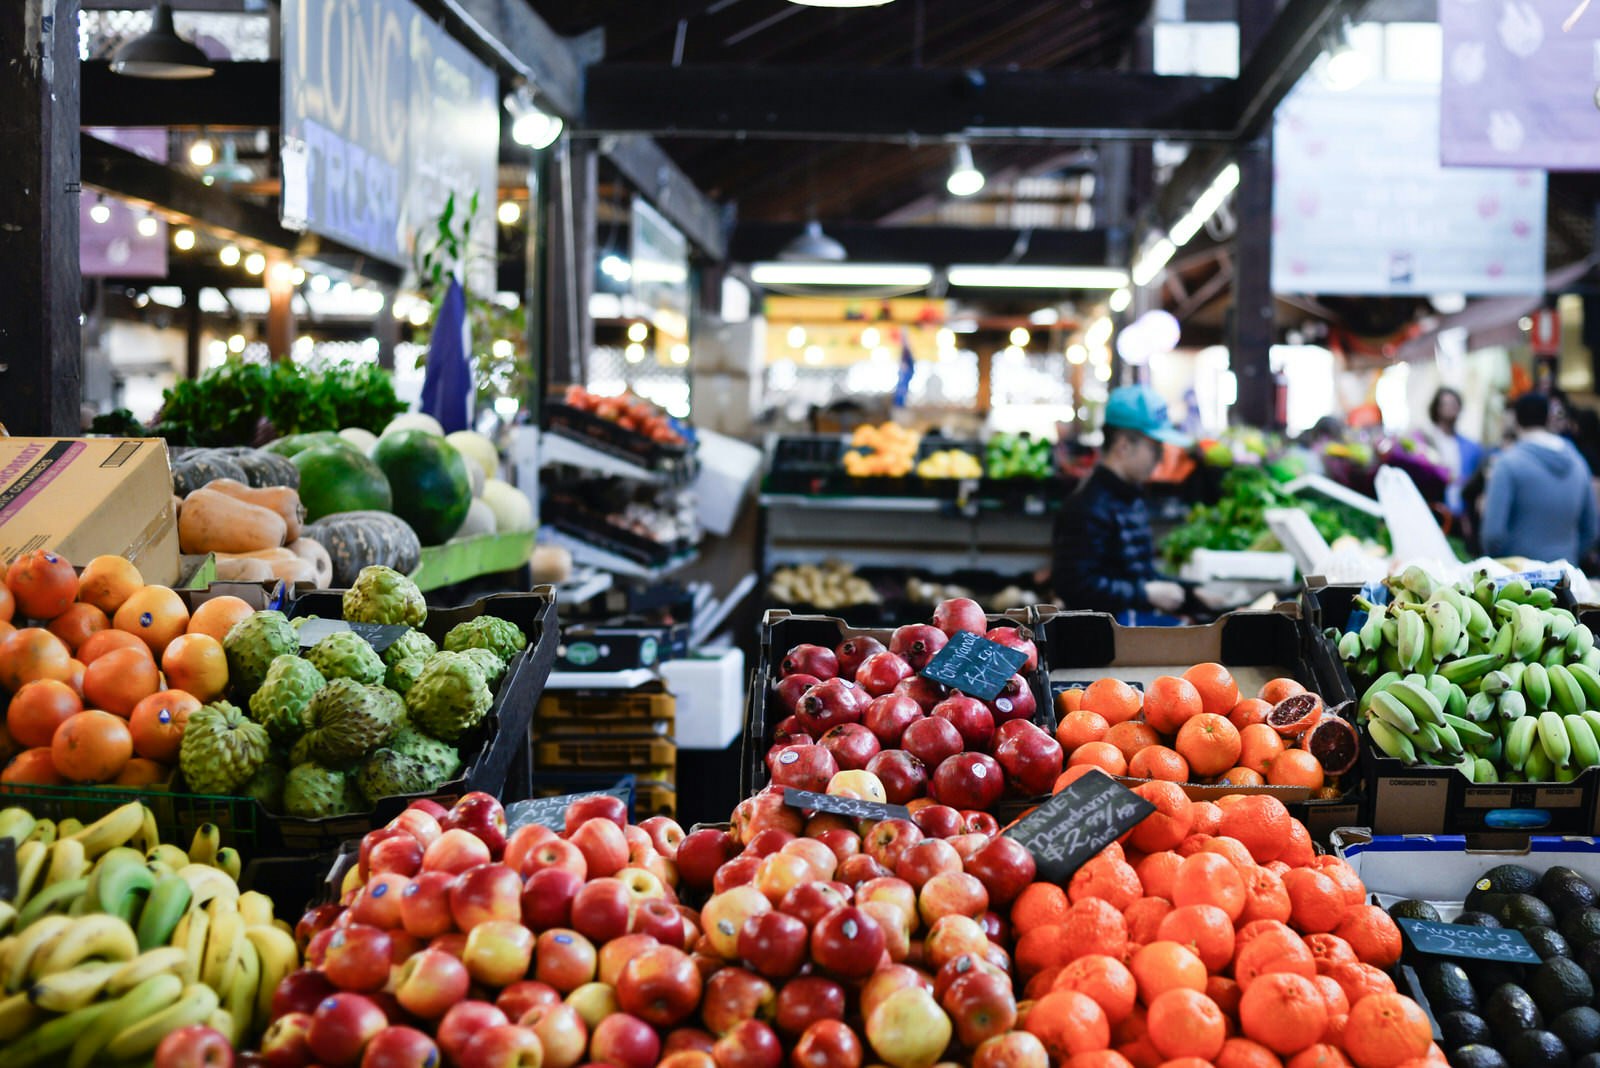 Various fresh fruits and vegetables are available for sale in Fremantle Market in Perth, Australia.